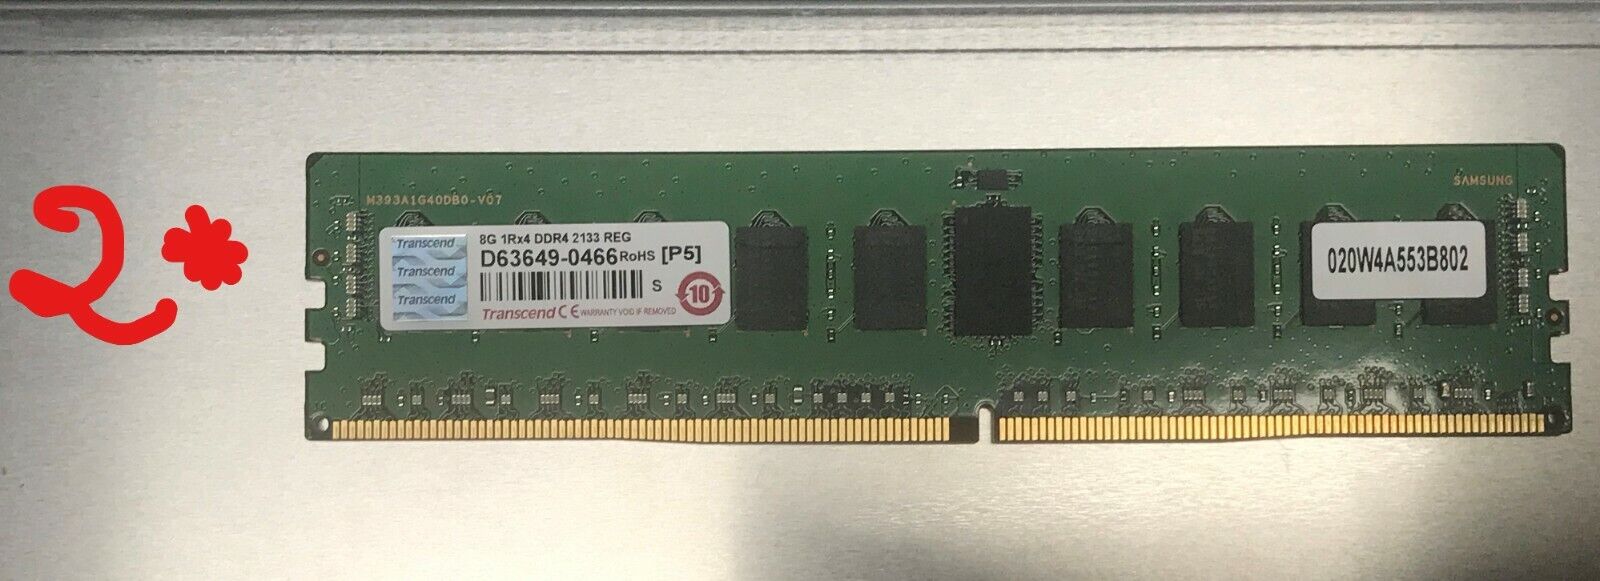 CPAC-RAM16GB-15400  Memory Kit 16G (2x 8GB) Kit for 15400 Appliances New Pulled